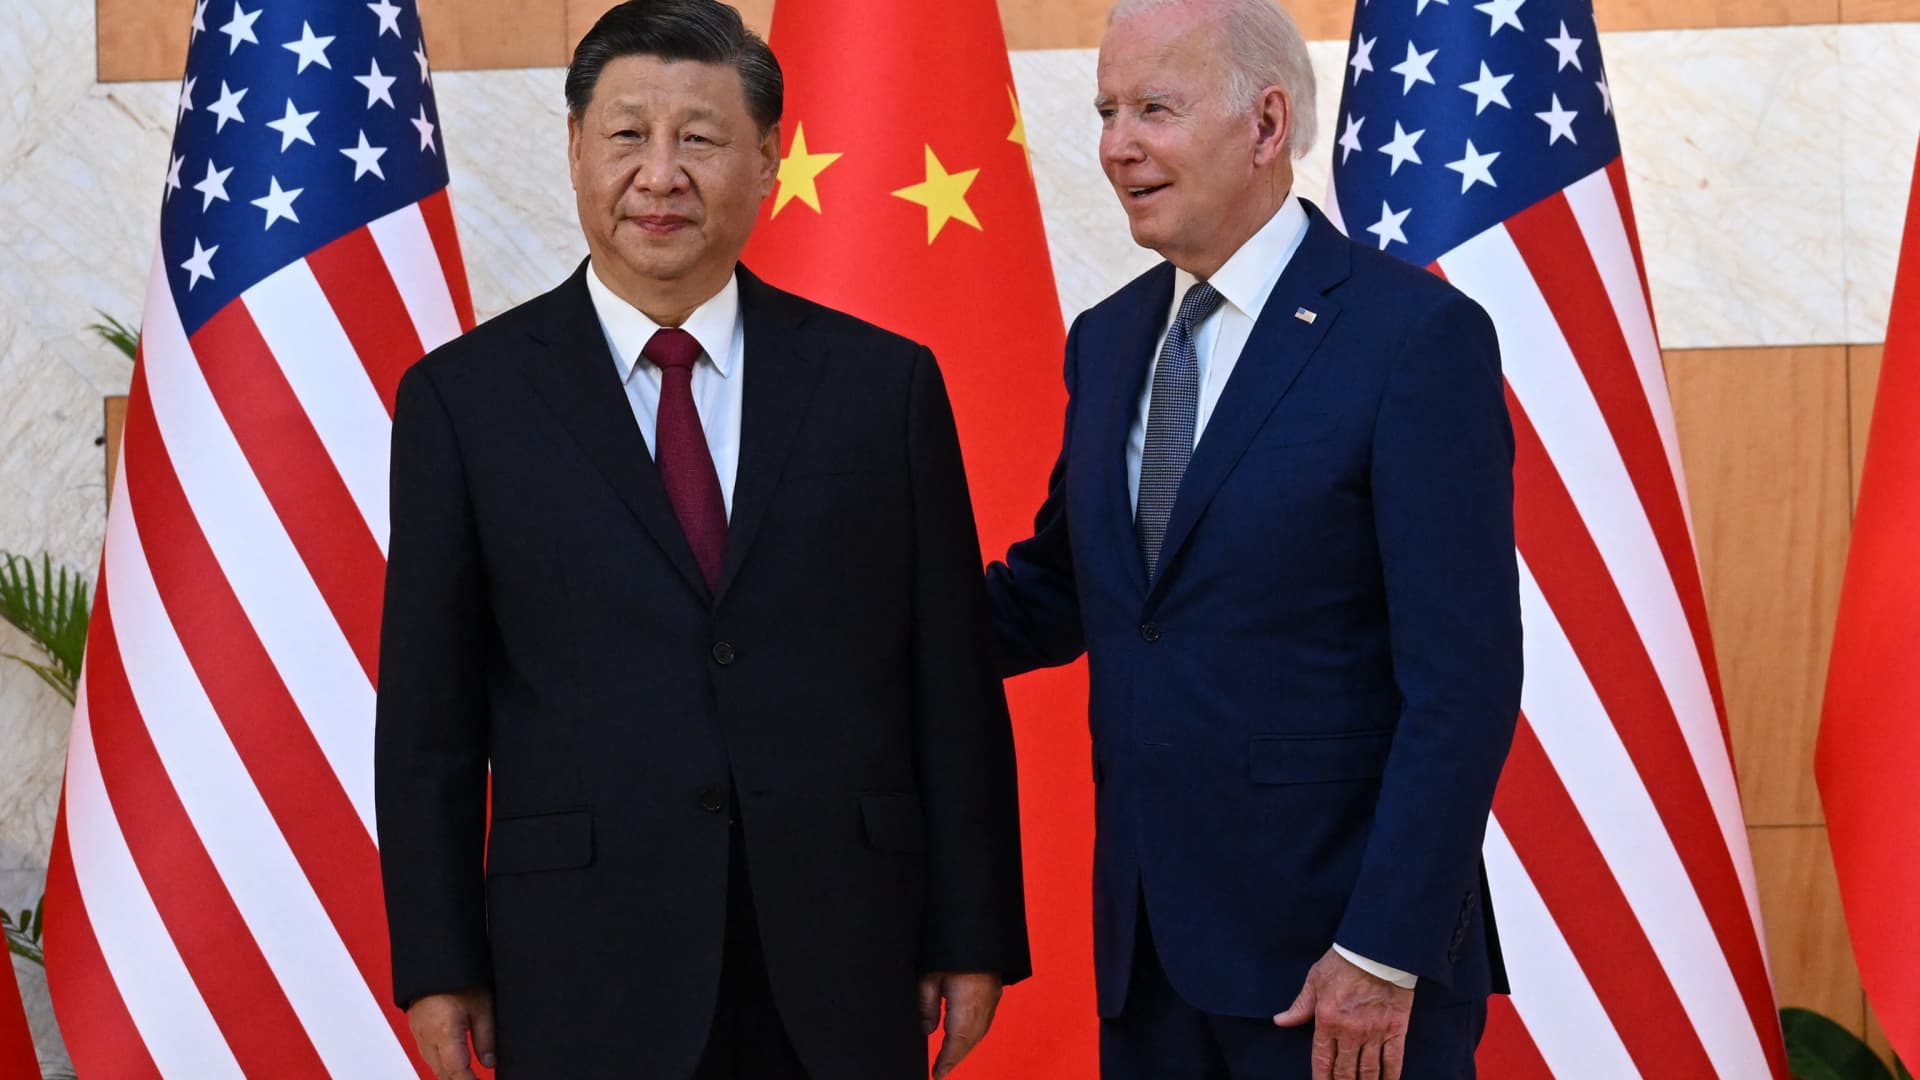 U.S. wins international leadership acceptance in excess of China when a Democrat is president, Gallup investigation demonstrates